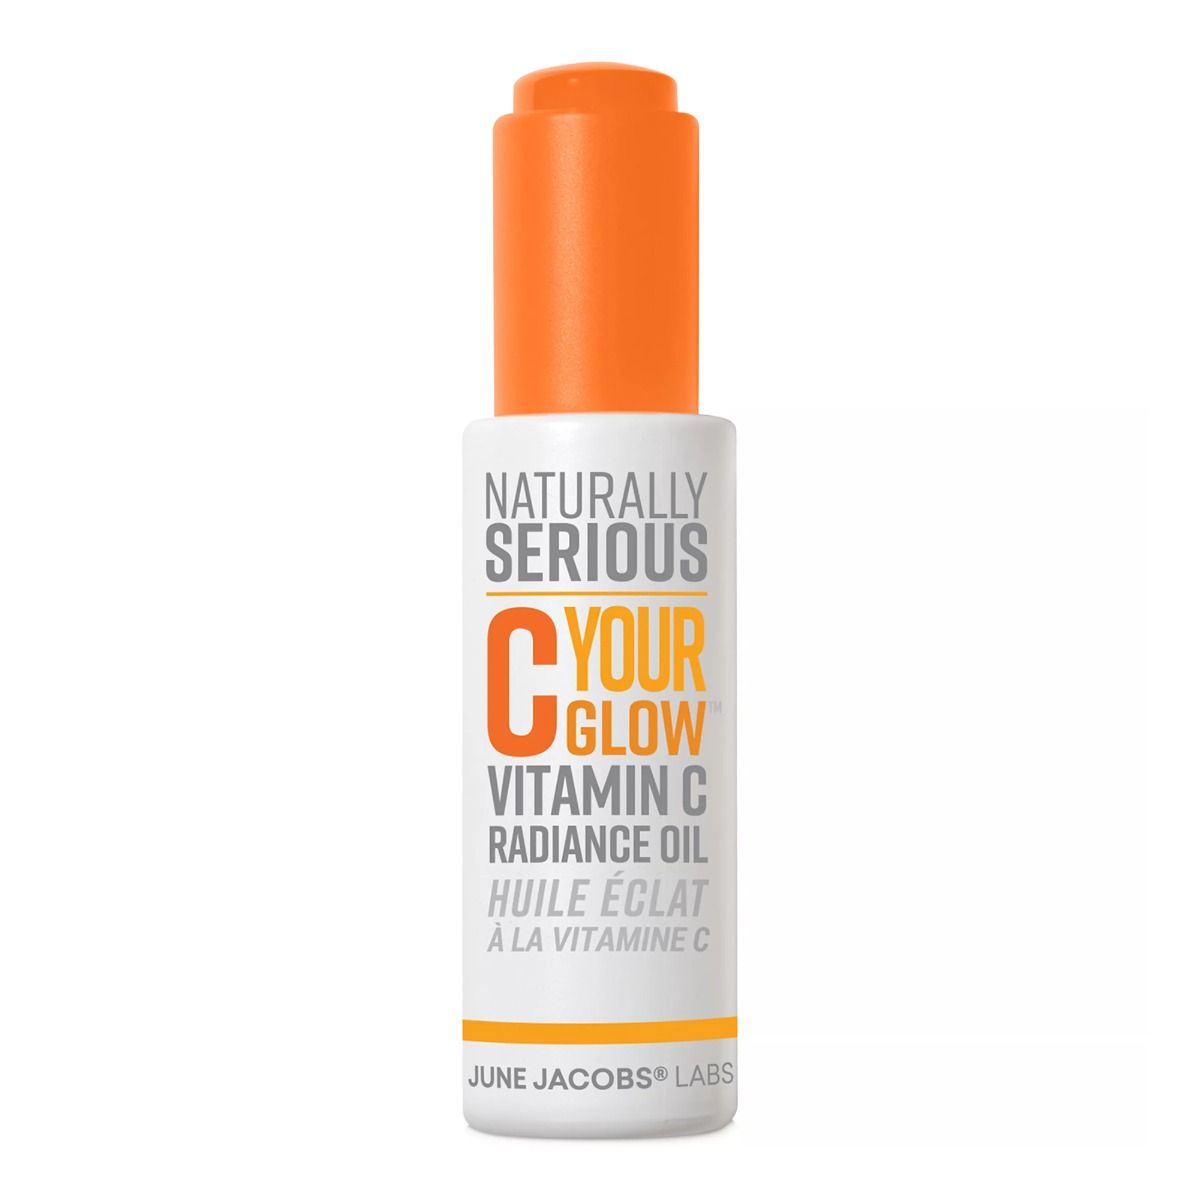 Naturally Serious C Your Glow Vitamin C Radiance Oil 1.0oz